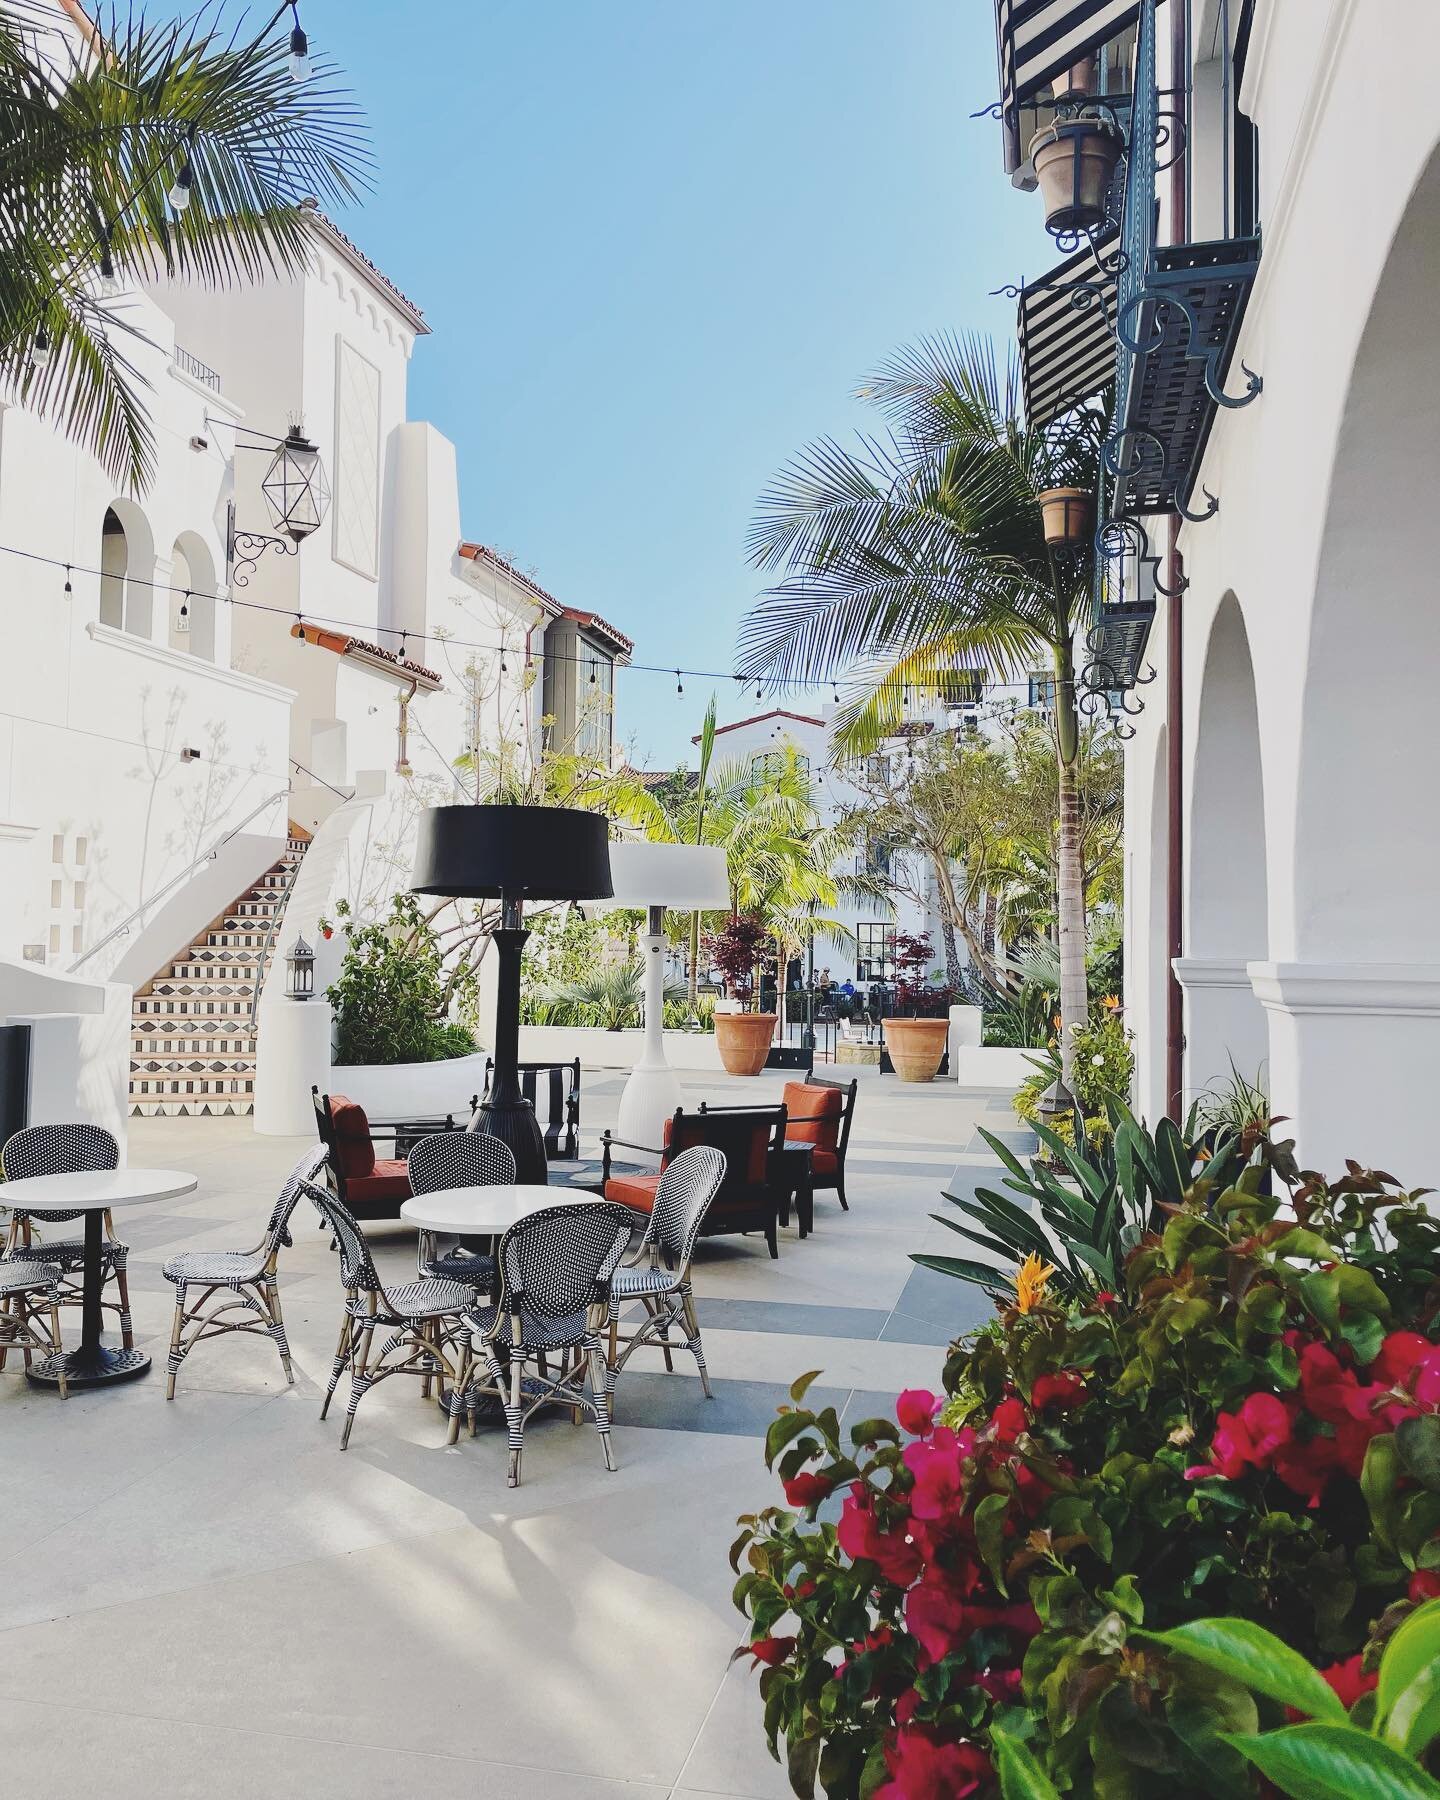 Hello Santa Barbara! 🌺☀️Relishing our stay at the famed Hotel Californian. &ldquo;Featuring dazzling spaces from celebrity designer Martyn Lawrence Bullard, the iconoclastic enclave - part history, part imagination and all Californian&hellip;&rdquo;